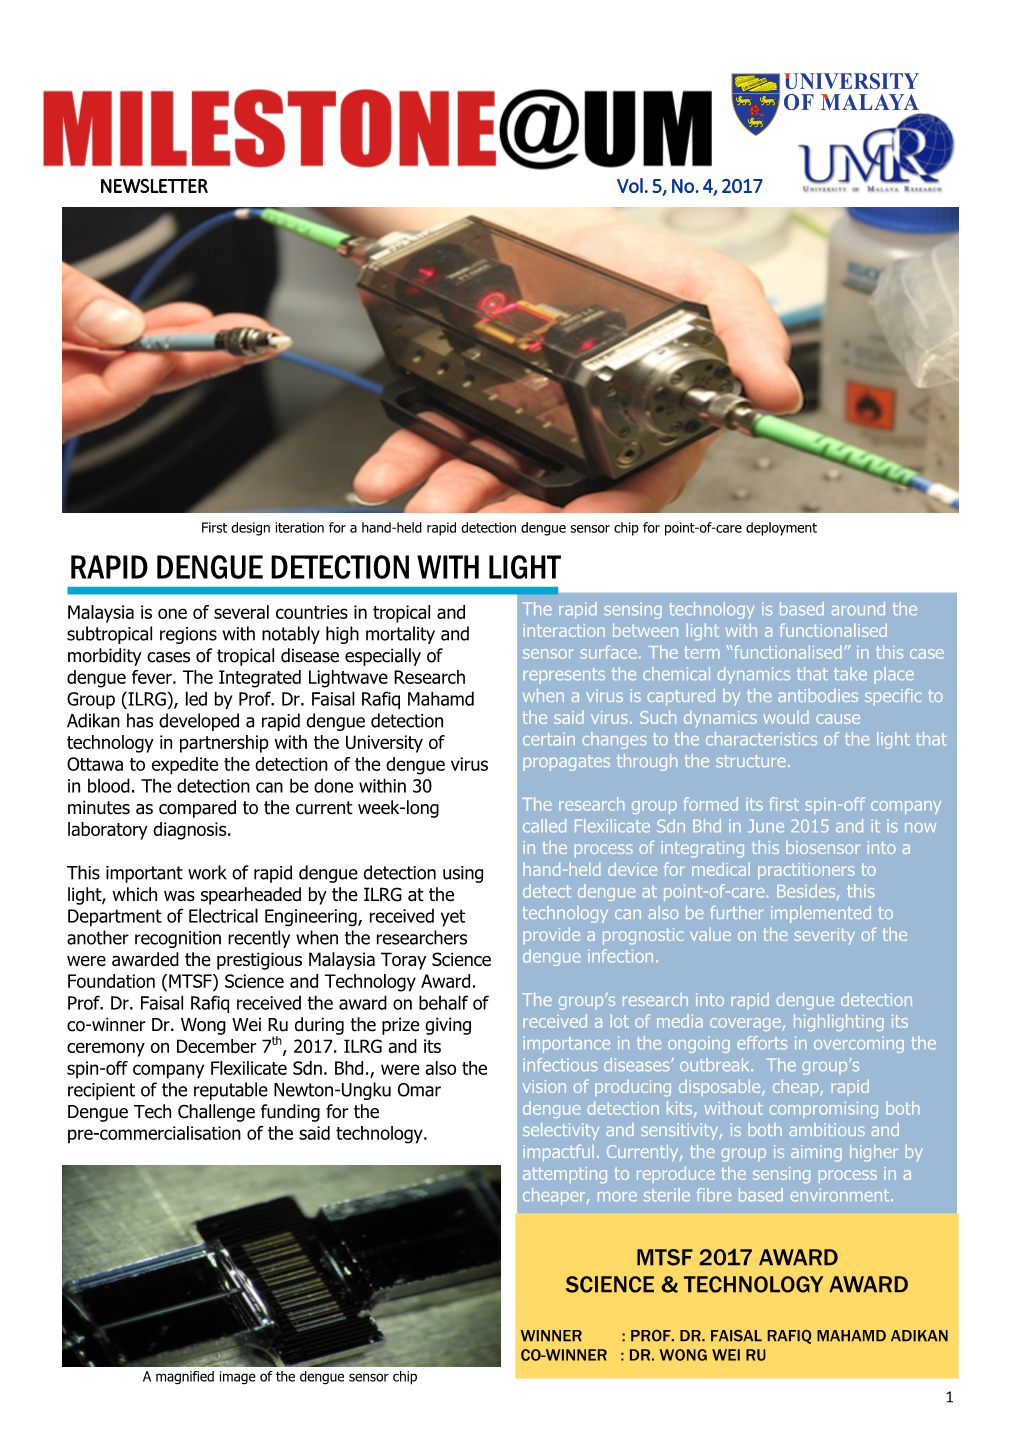 Rapid Dengue Detection with Light